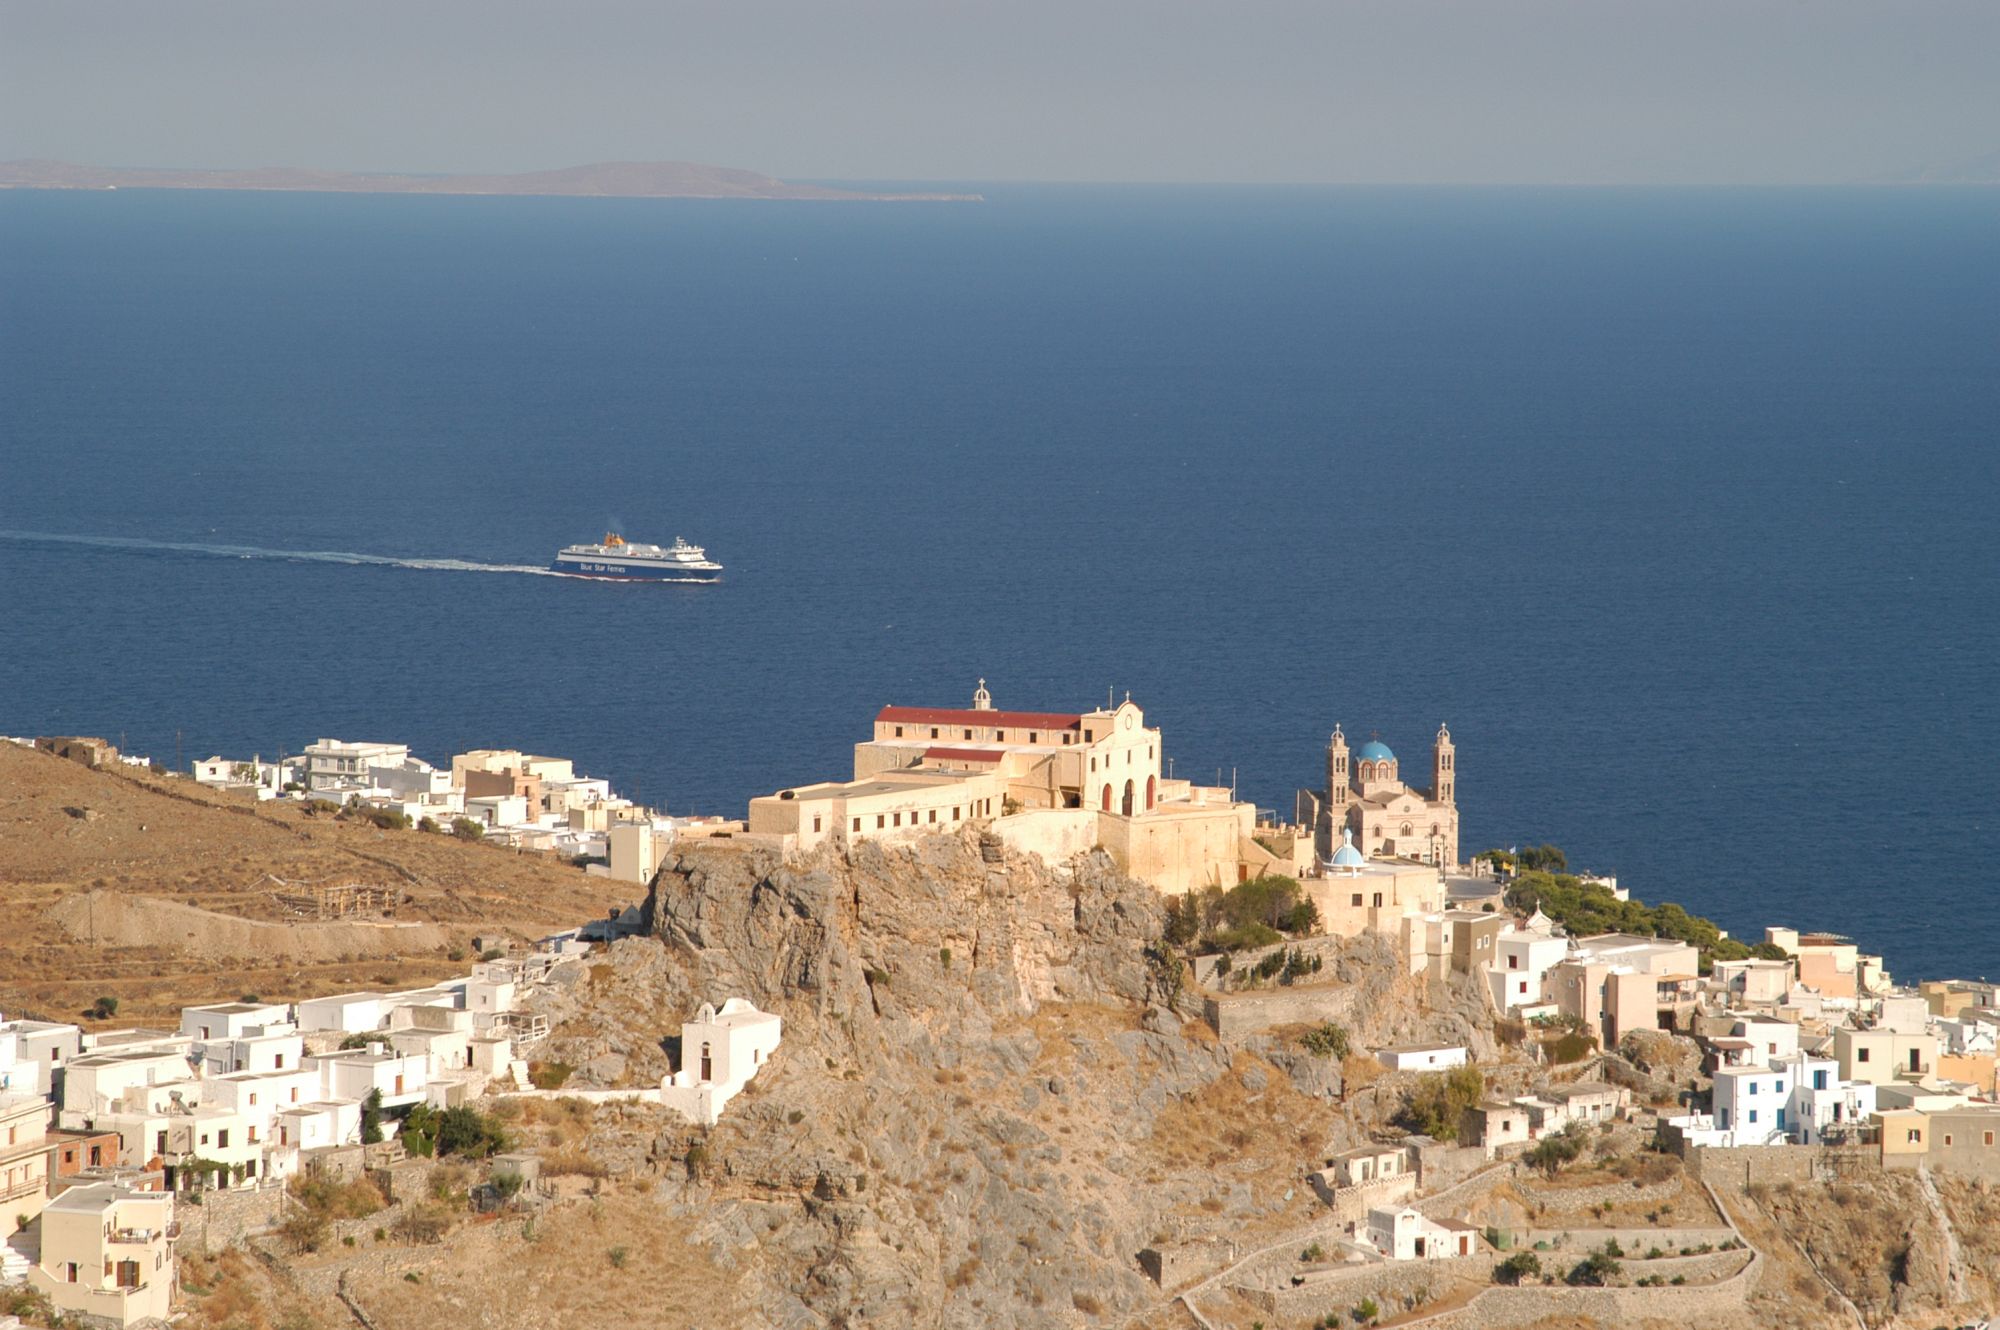 Saint George catholic church in Syros and the blue sea at the background.